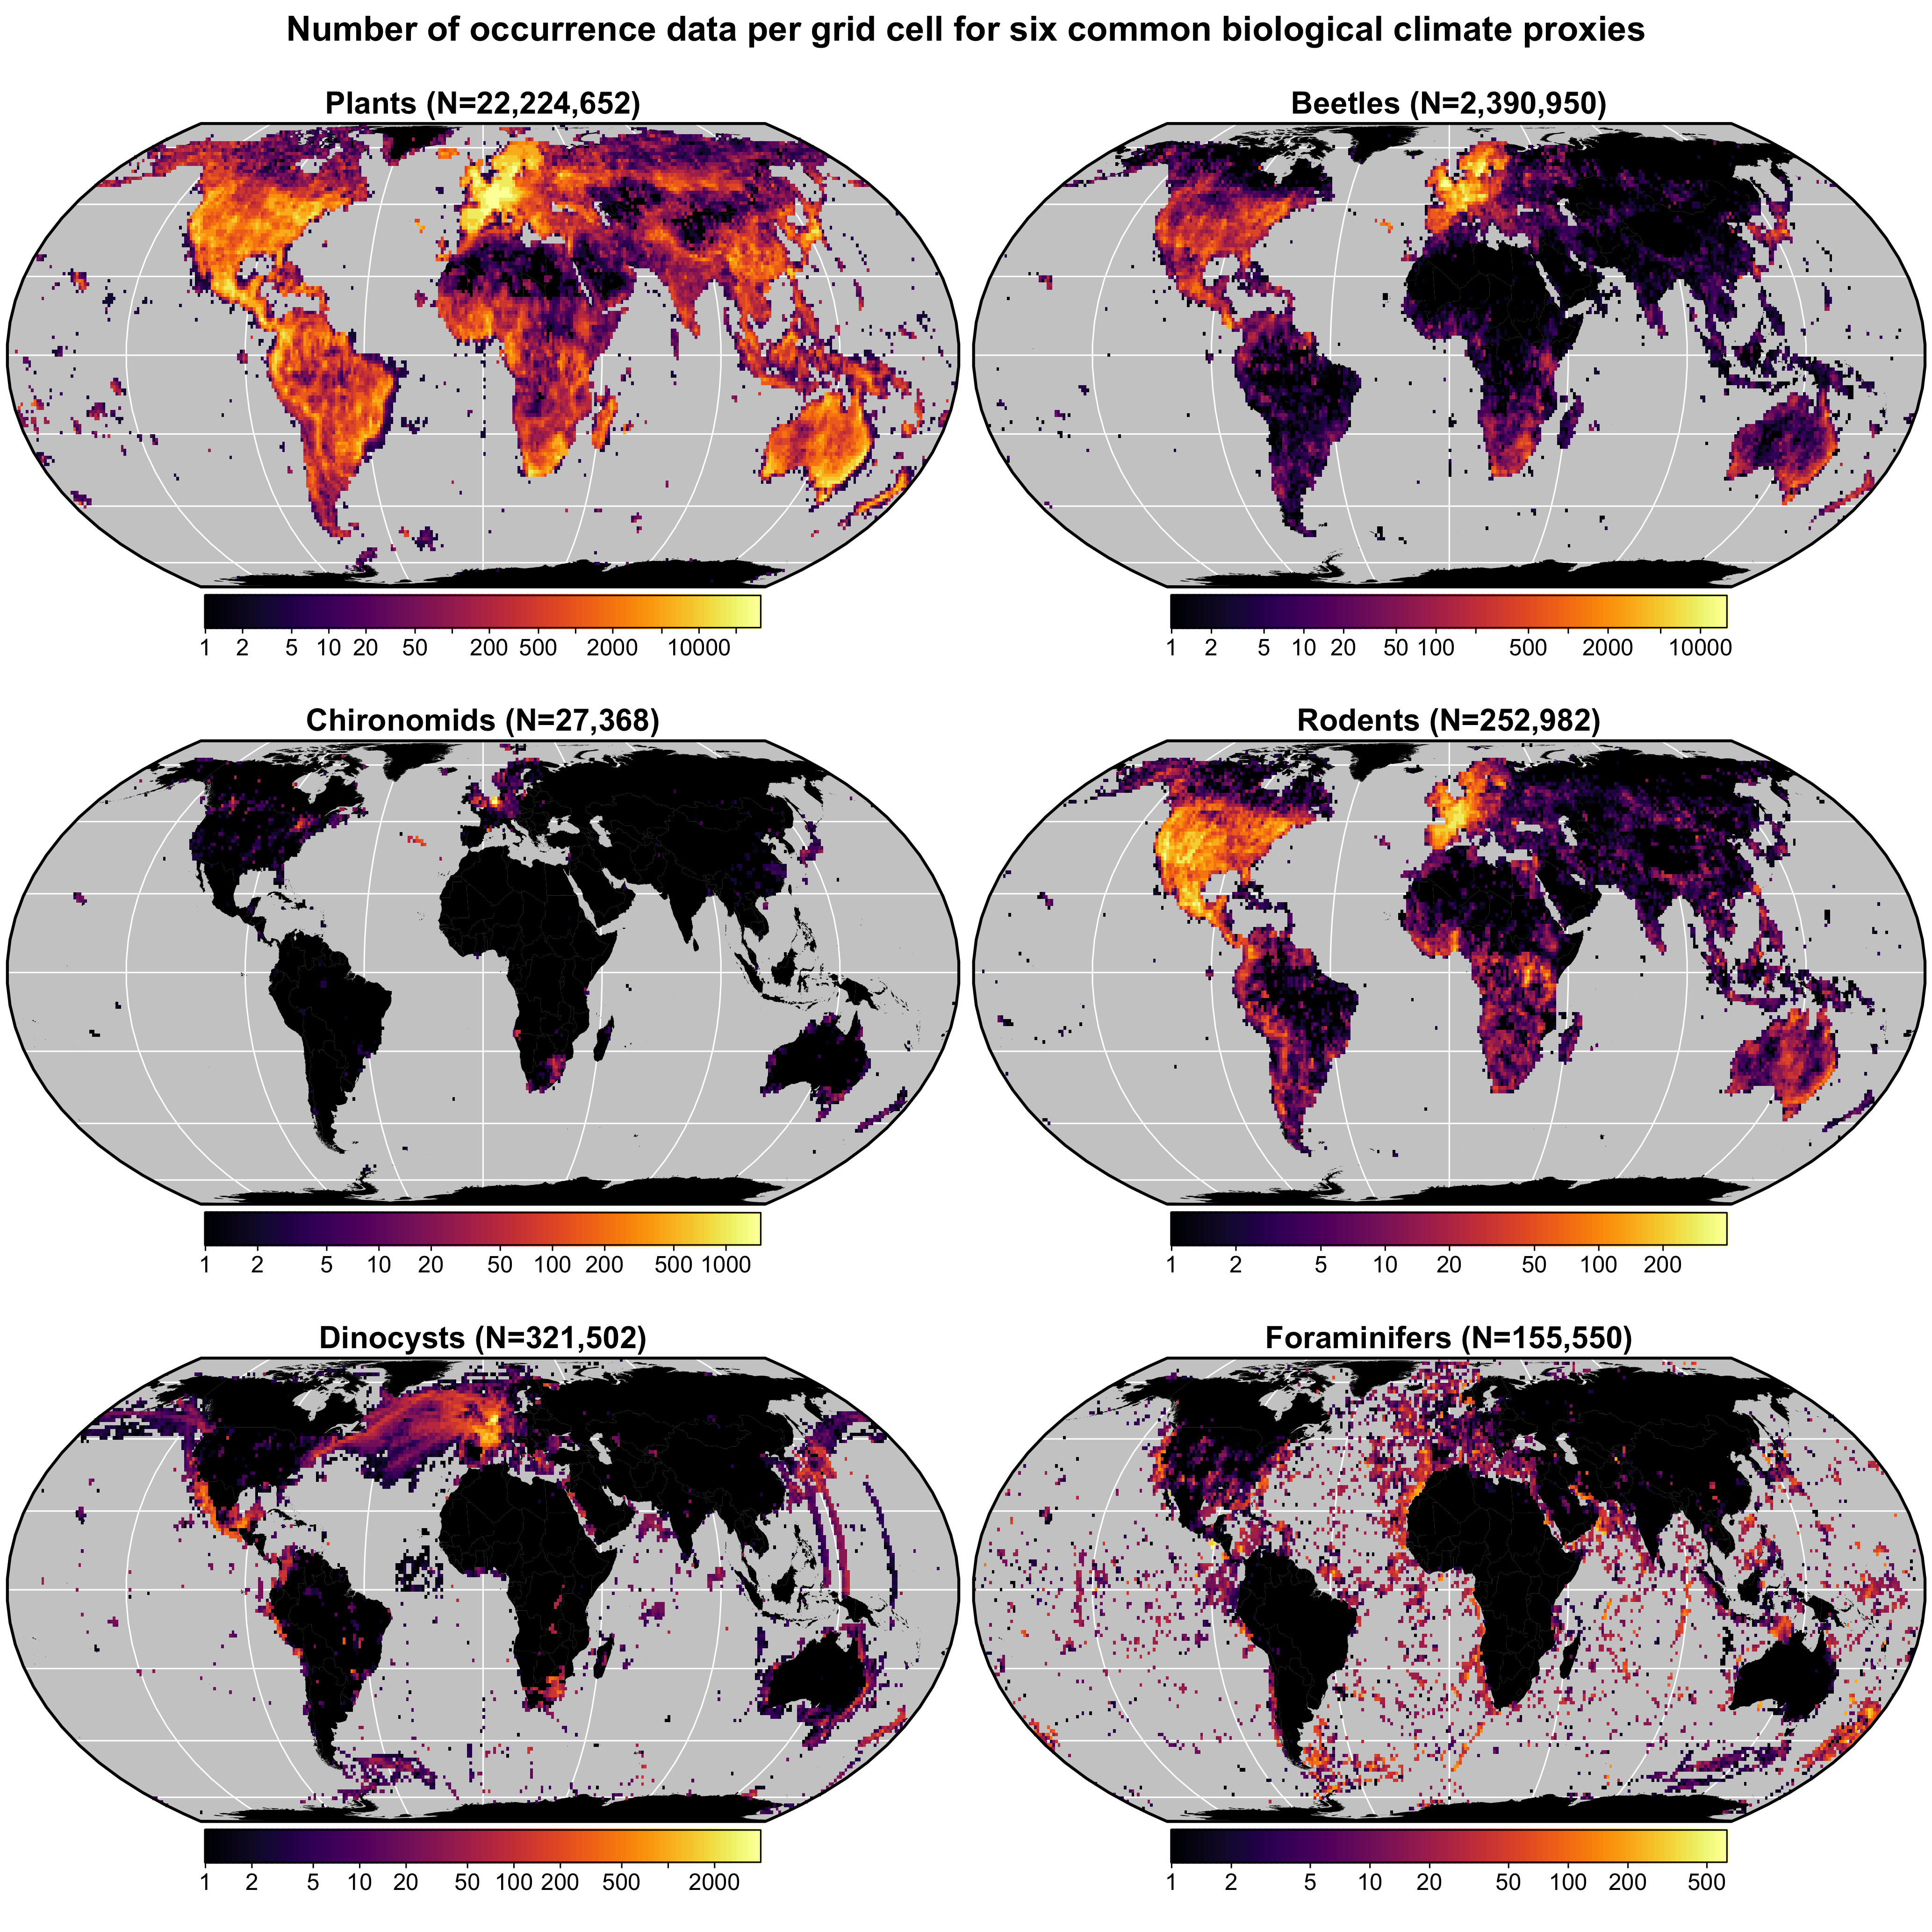 **Fig. 1** Data density of the six climate proxies available in the gbif4crest calibration database. The total number of unique species occurrences (N) is indicated for each proxy. The maps are based on the ‘Equal Earth’ map projection to better account for the relative sizes of the different continents.